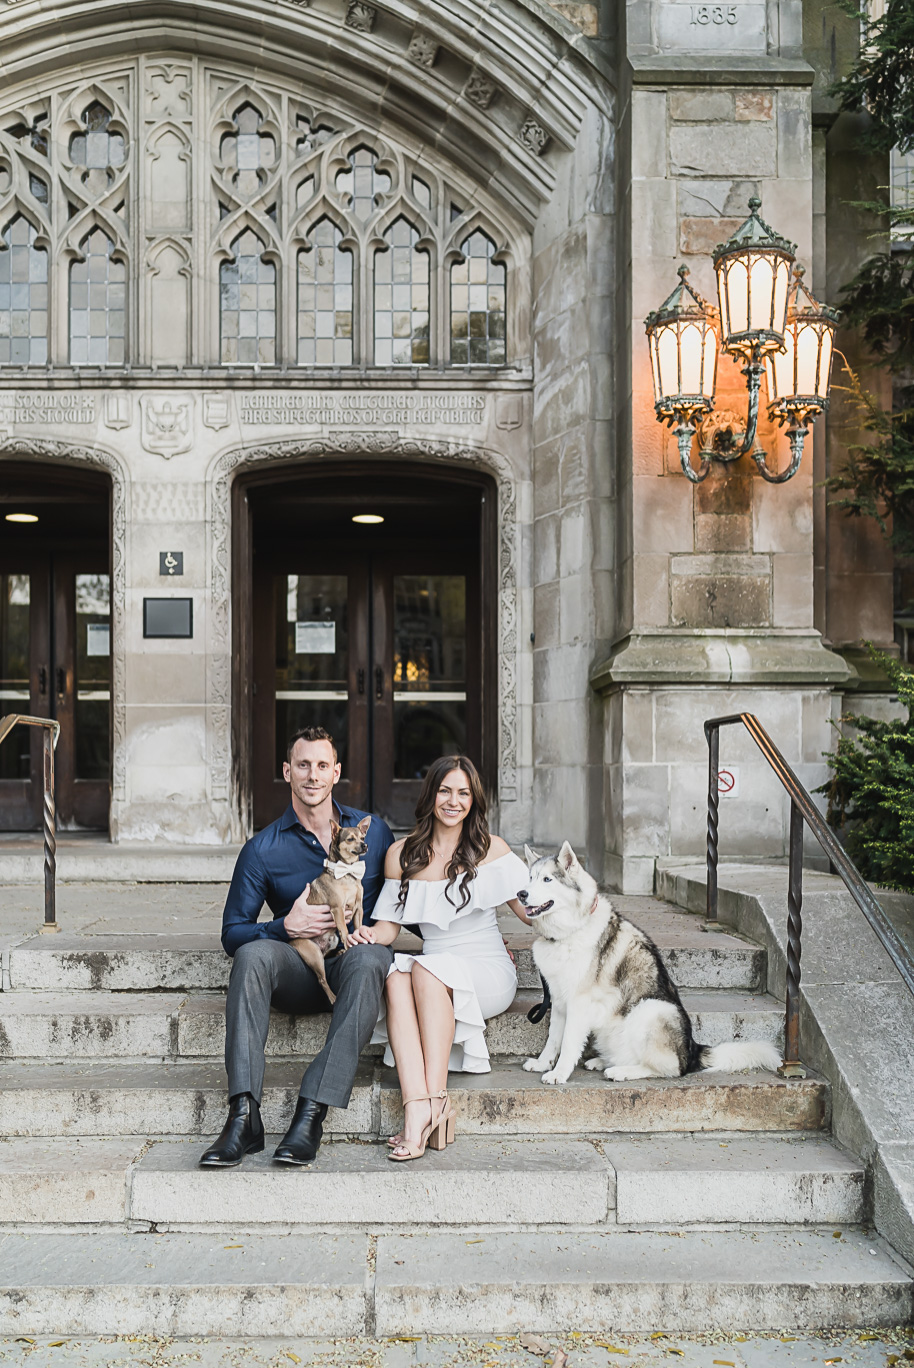 Classic Ann Arbor Engagement photos at the Law Quad with stunning architecture and blooming trees by Kari Dawson Photography.